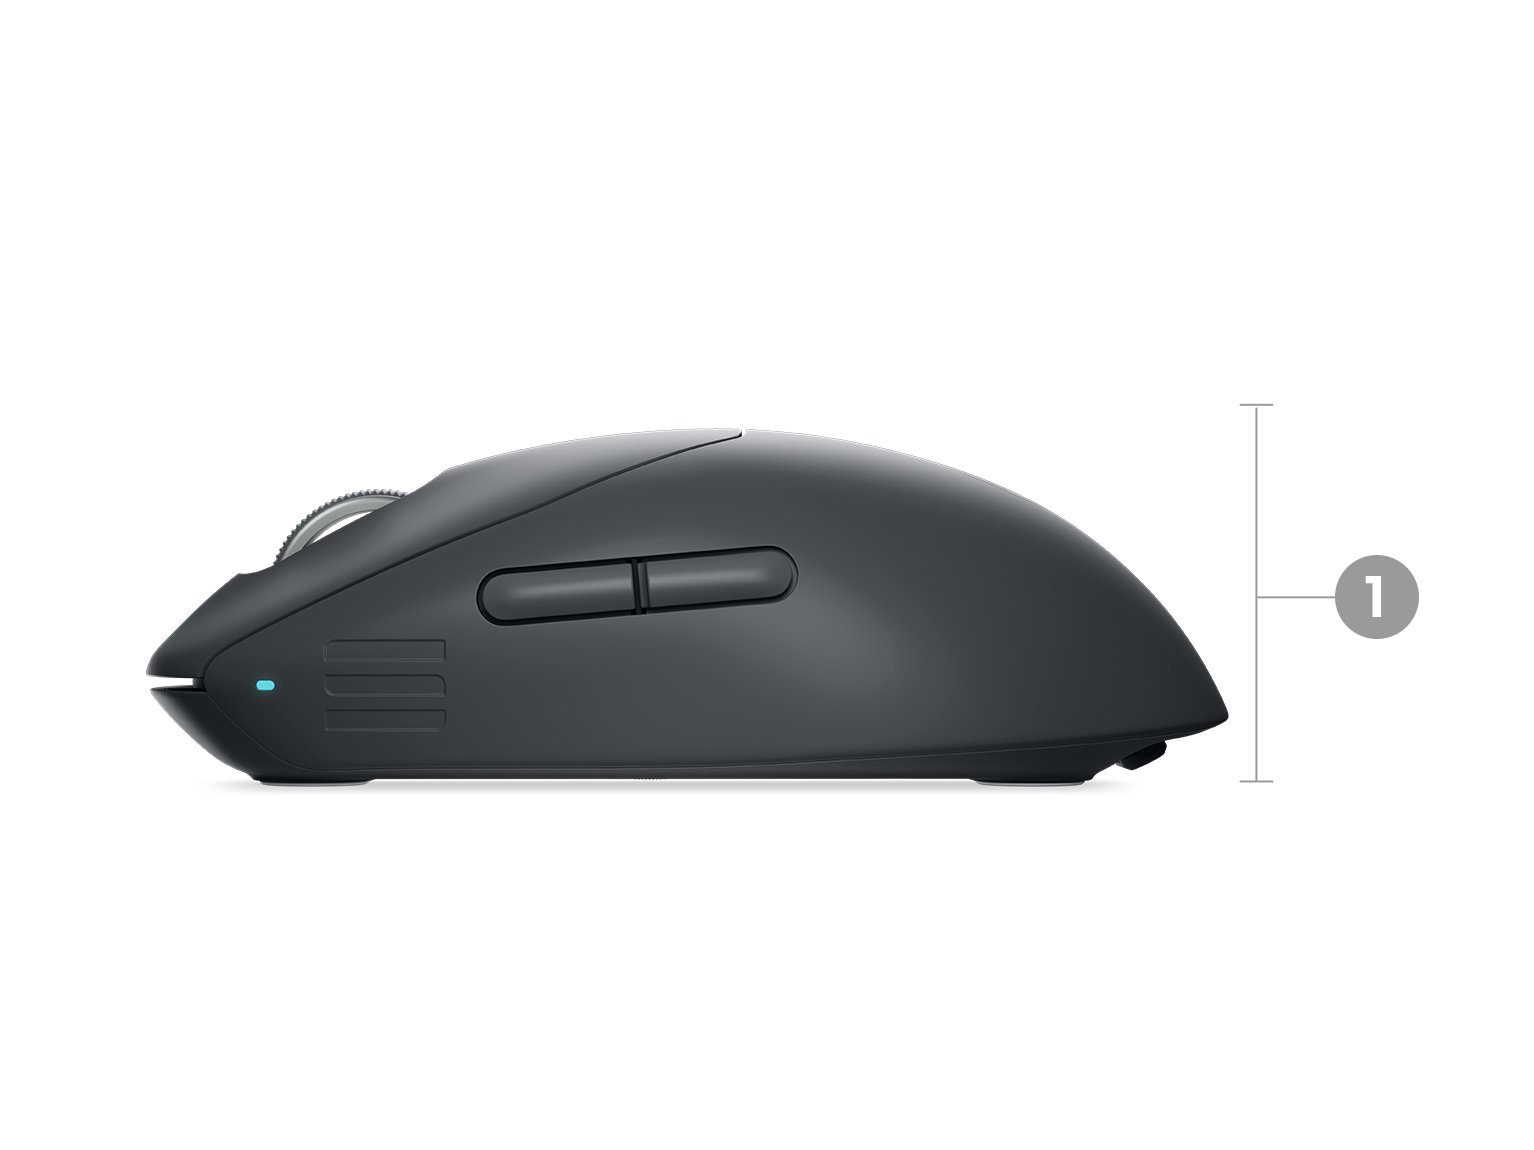 Dell Alienware Pro Wireless Gaming Mouse with numbers from 1 to 3 showing the product dimensions and weight.